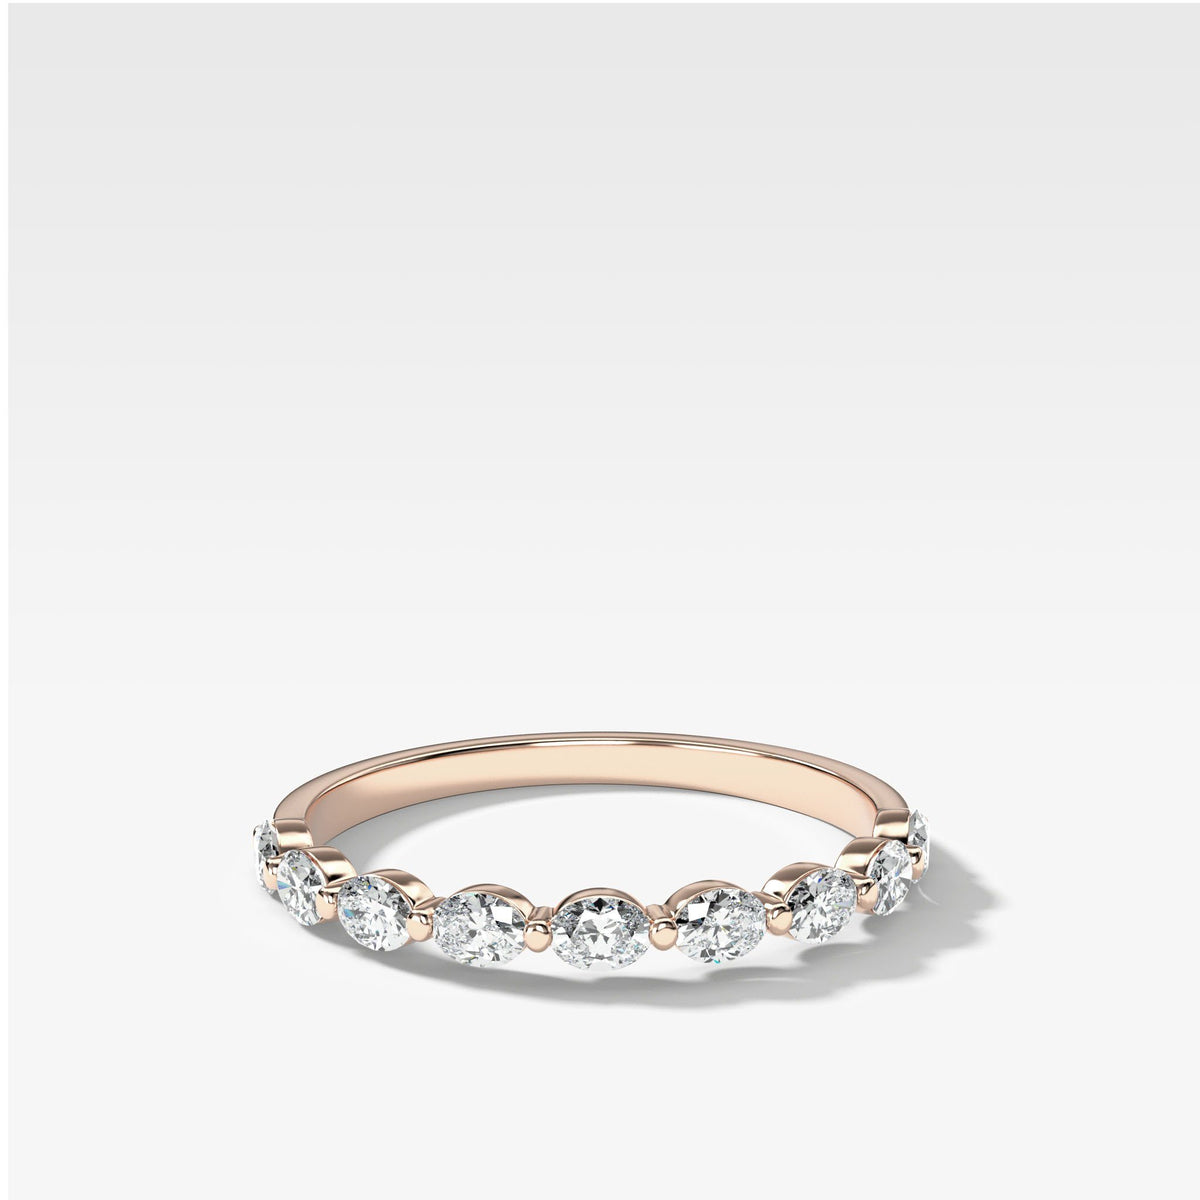 Oval Interstellar Wedding Band by Good Stone in Rose Gold